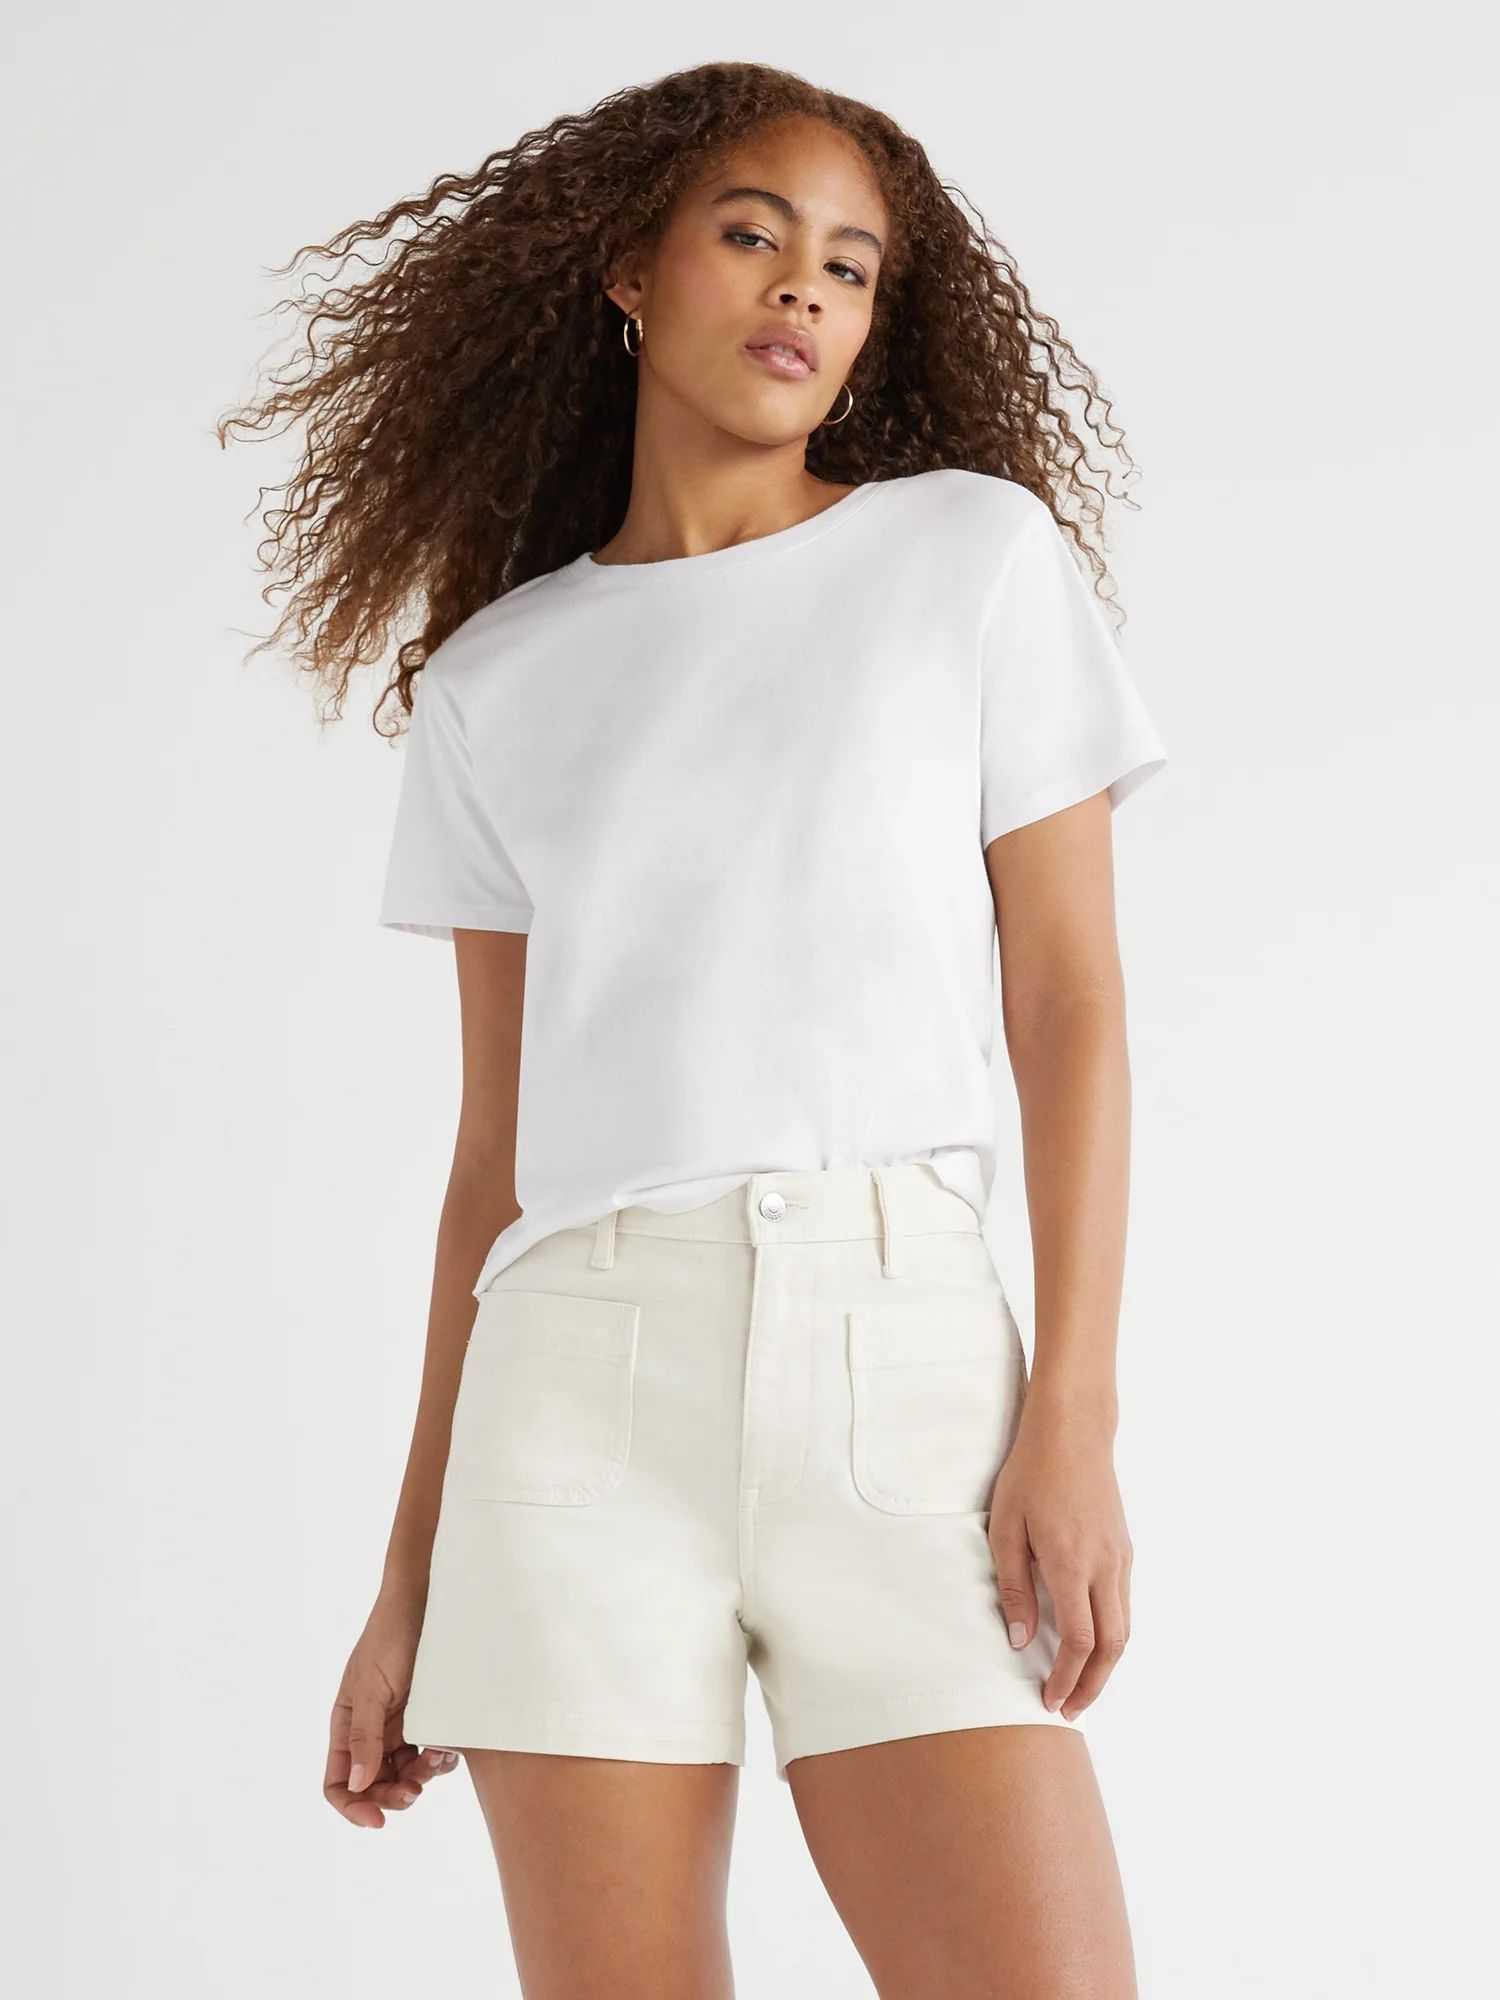 Free Assembly Women?s Cotton Cropped Boxy Tee with Short Sleeves, Sizes XS-XXL | Walmart (US)